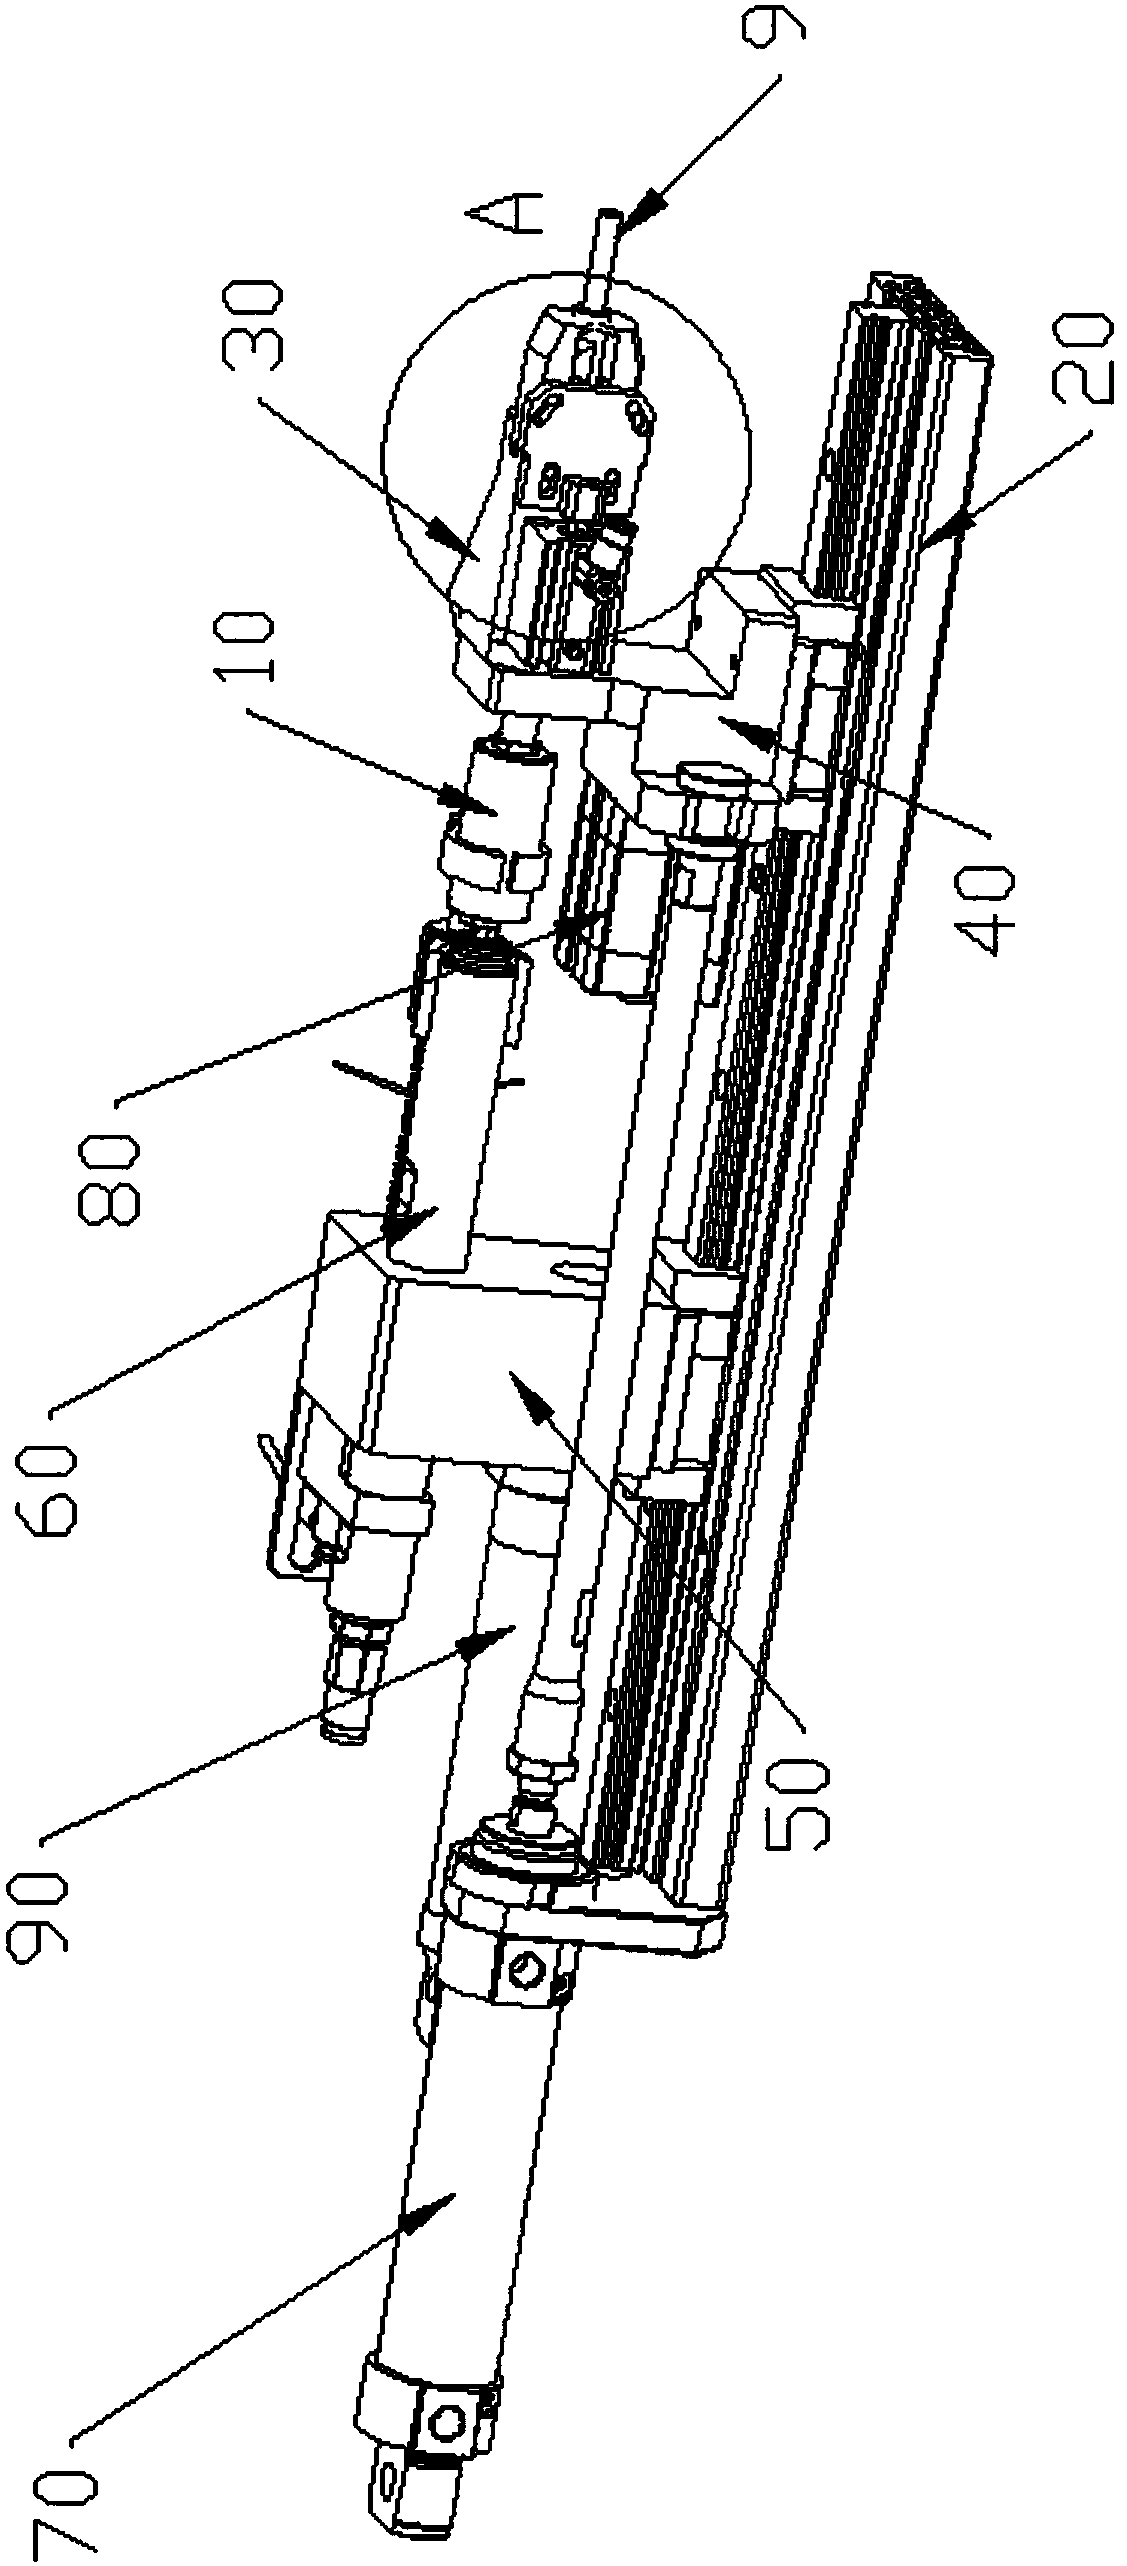 Nail feeding tail end locking device of double-end stud